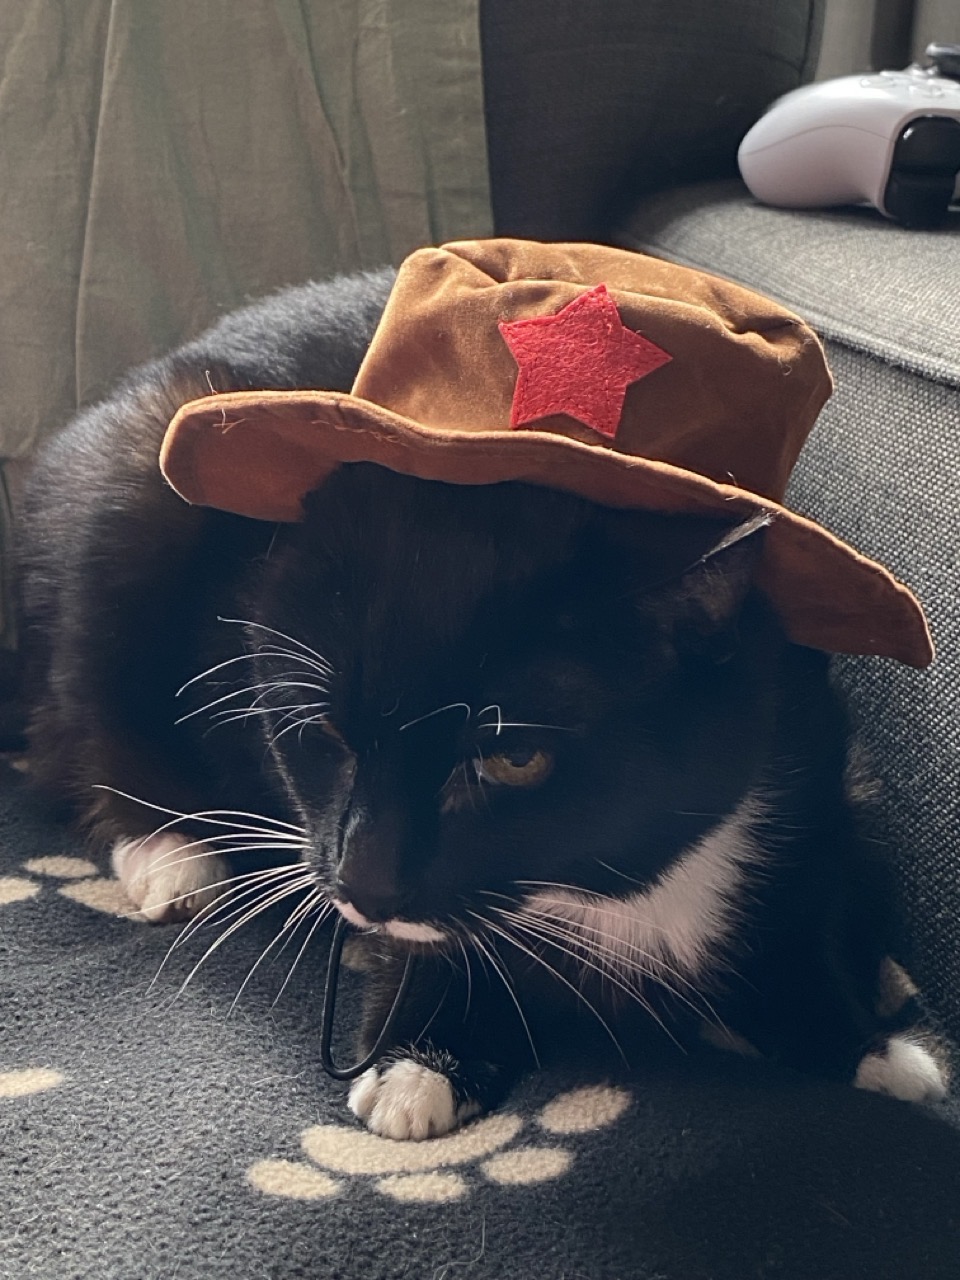 A cat wearing a cowboy hat. She looks distinctly unimpressed.